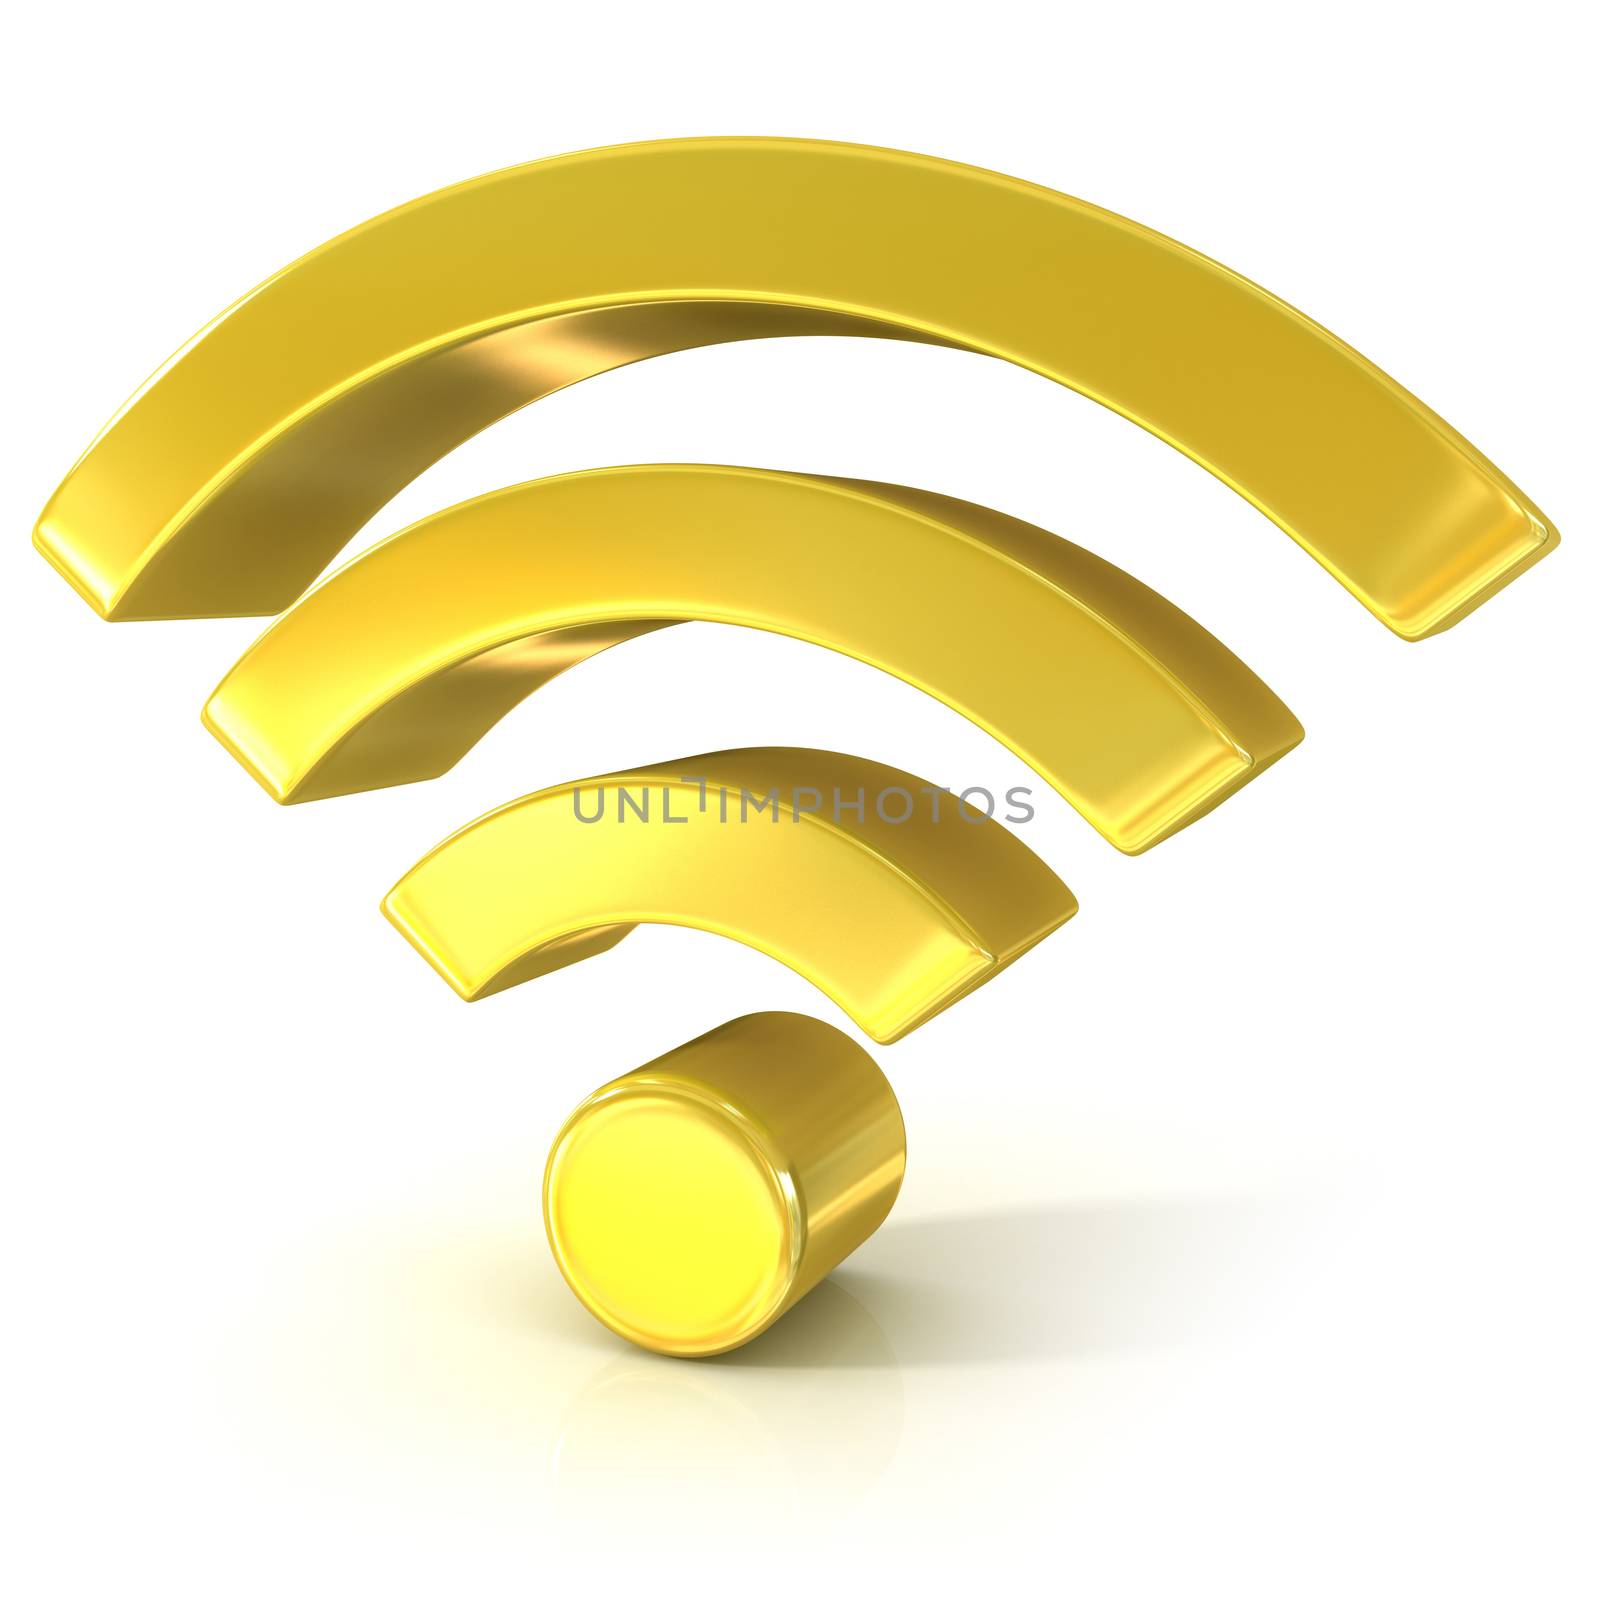 Wireless network 3D golden sign isolated on white background